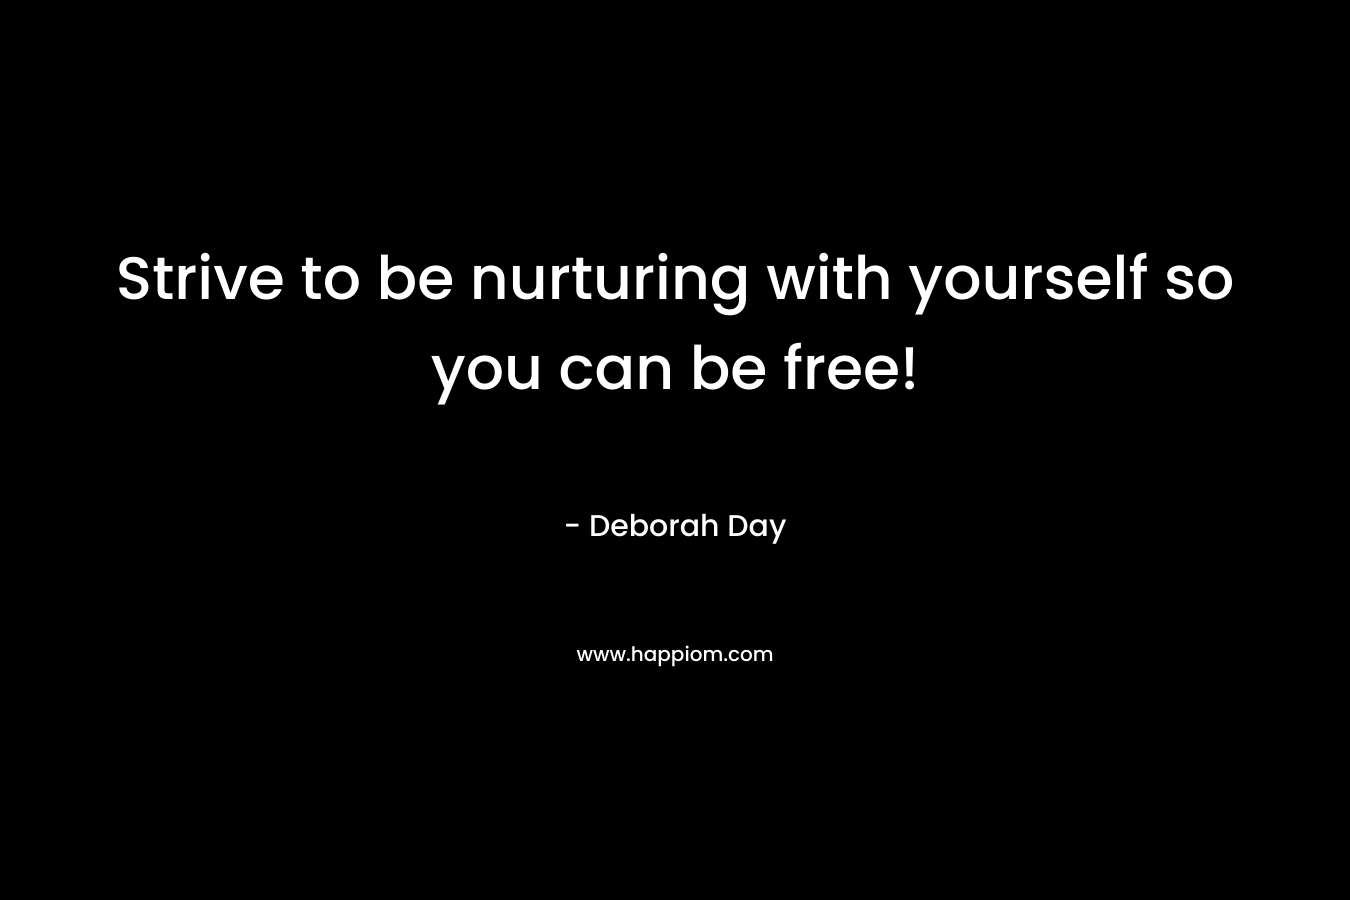 Strive to be nurturing with yourself so you can be free!